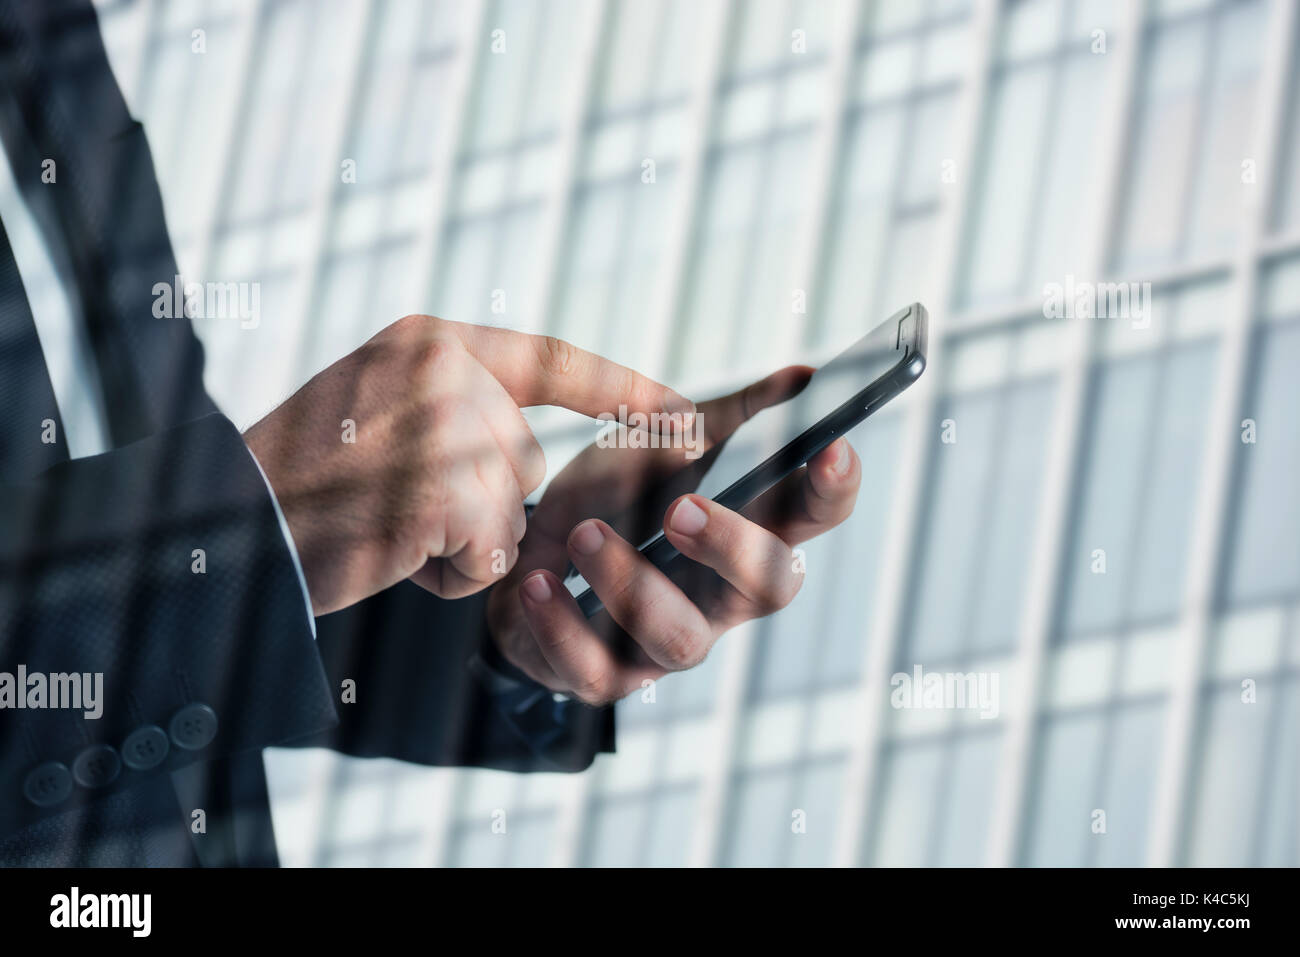 Closeup photo of businessman hands touching screen smartphone. blurred background. Stock Photo